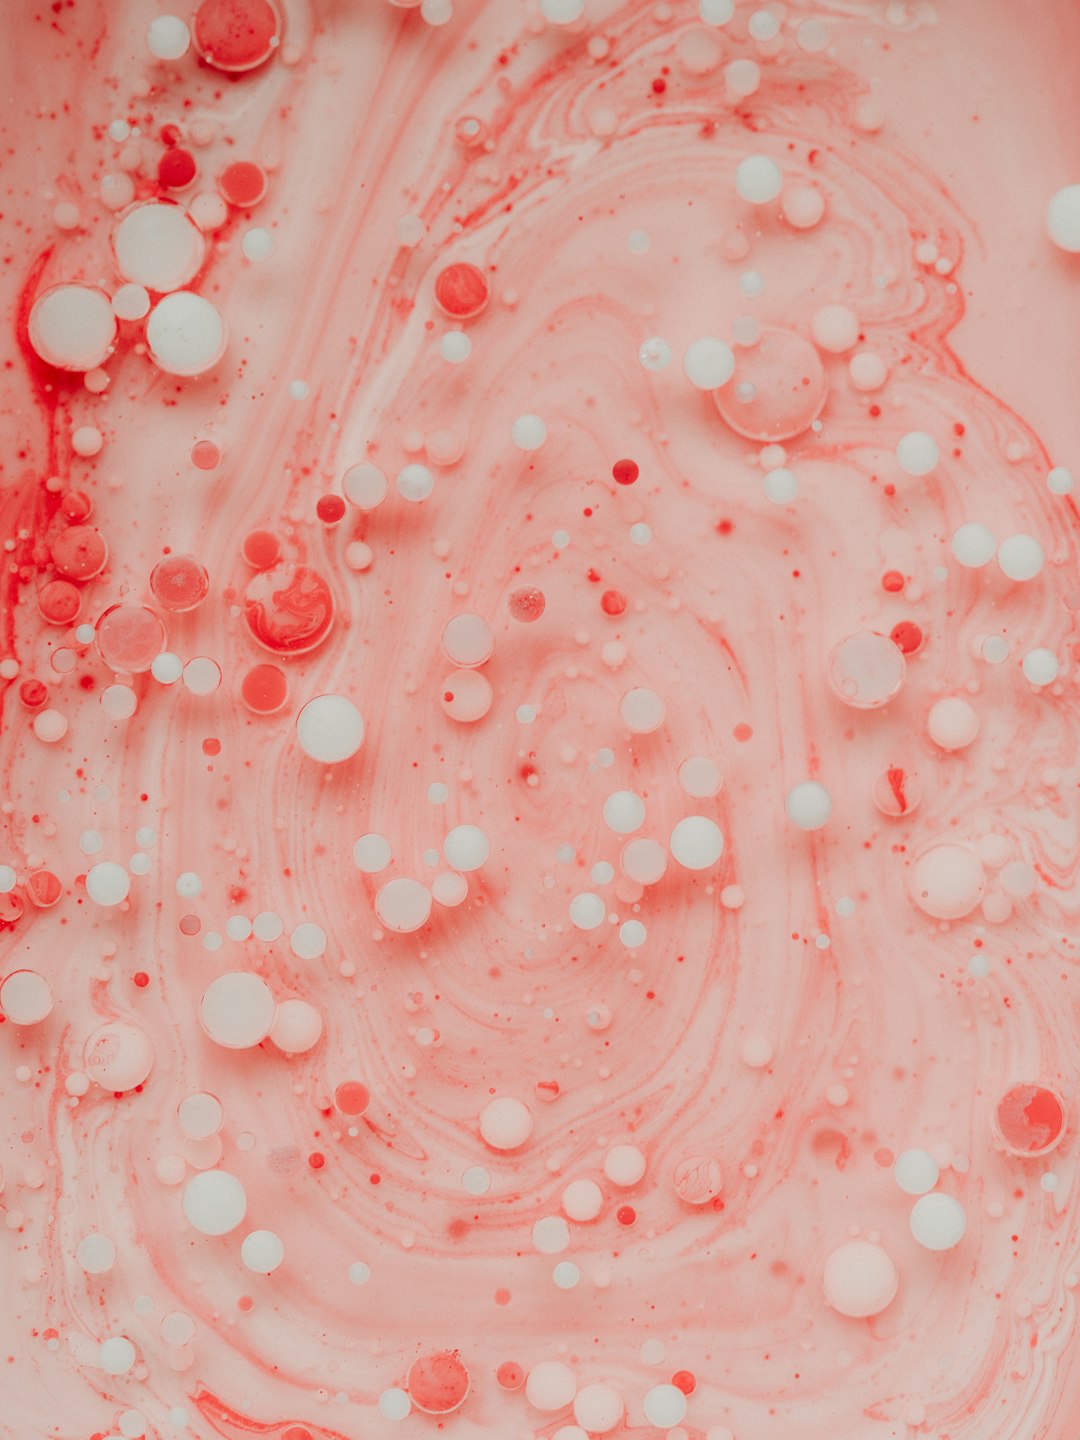 Abstract pink liquid background with white bubbles and red details, top view. Closeup photo. –ar 3:4